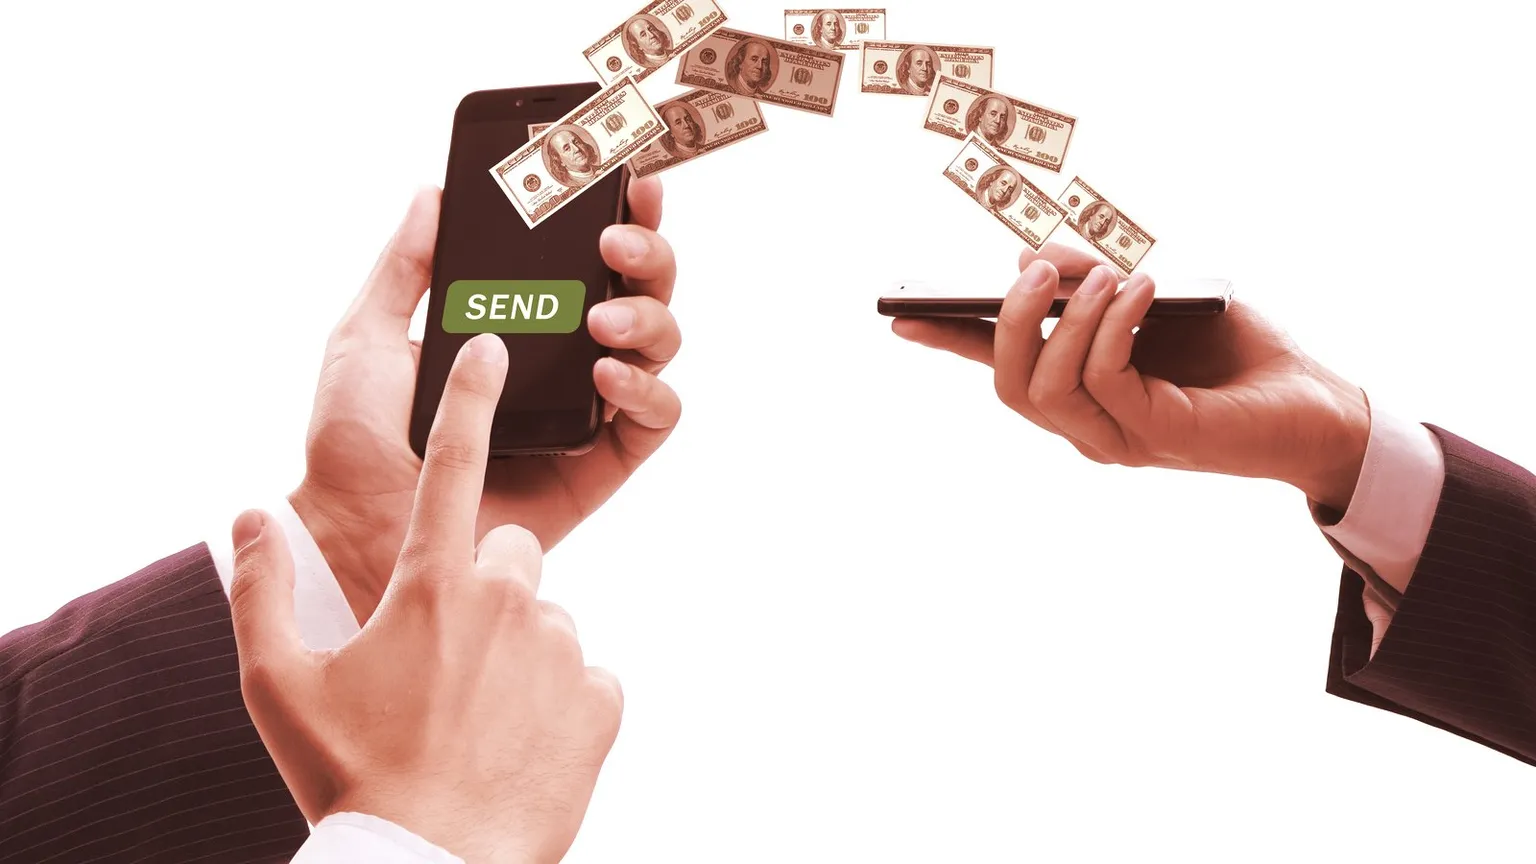 The latest product on the Celo platform is a P2P app for sending remittances cheaply. Image: Shutterstock